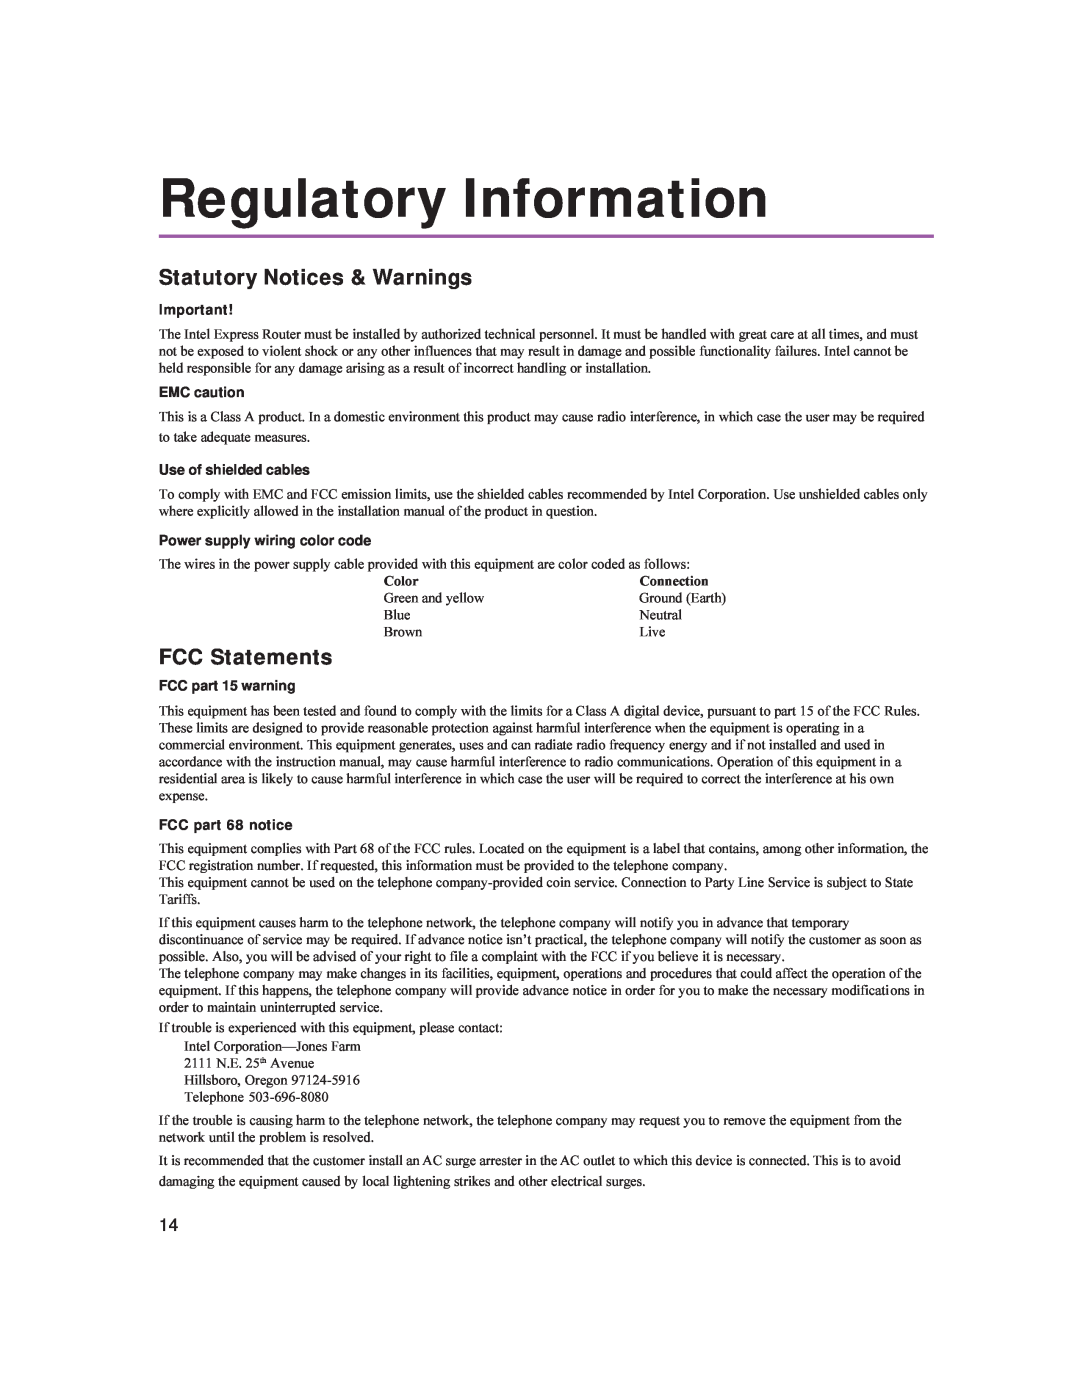 Intel 9545 Regulatory Information, Statutory Notices & Warnings, FCC Statements, EMC caution, Use of shielded cables 